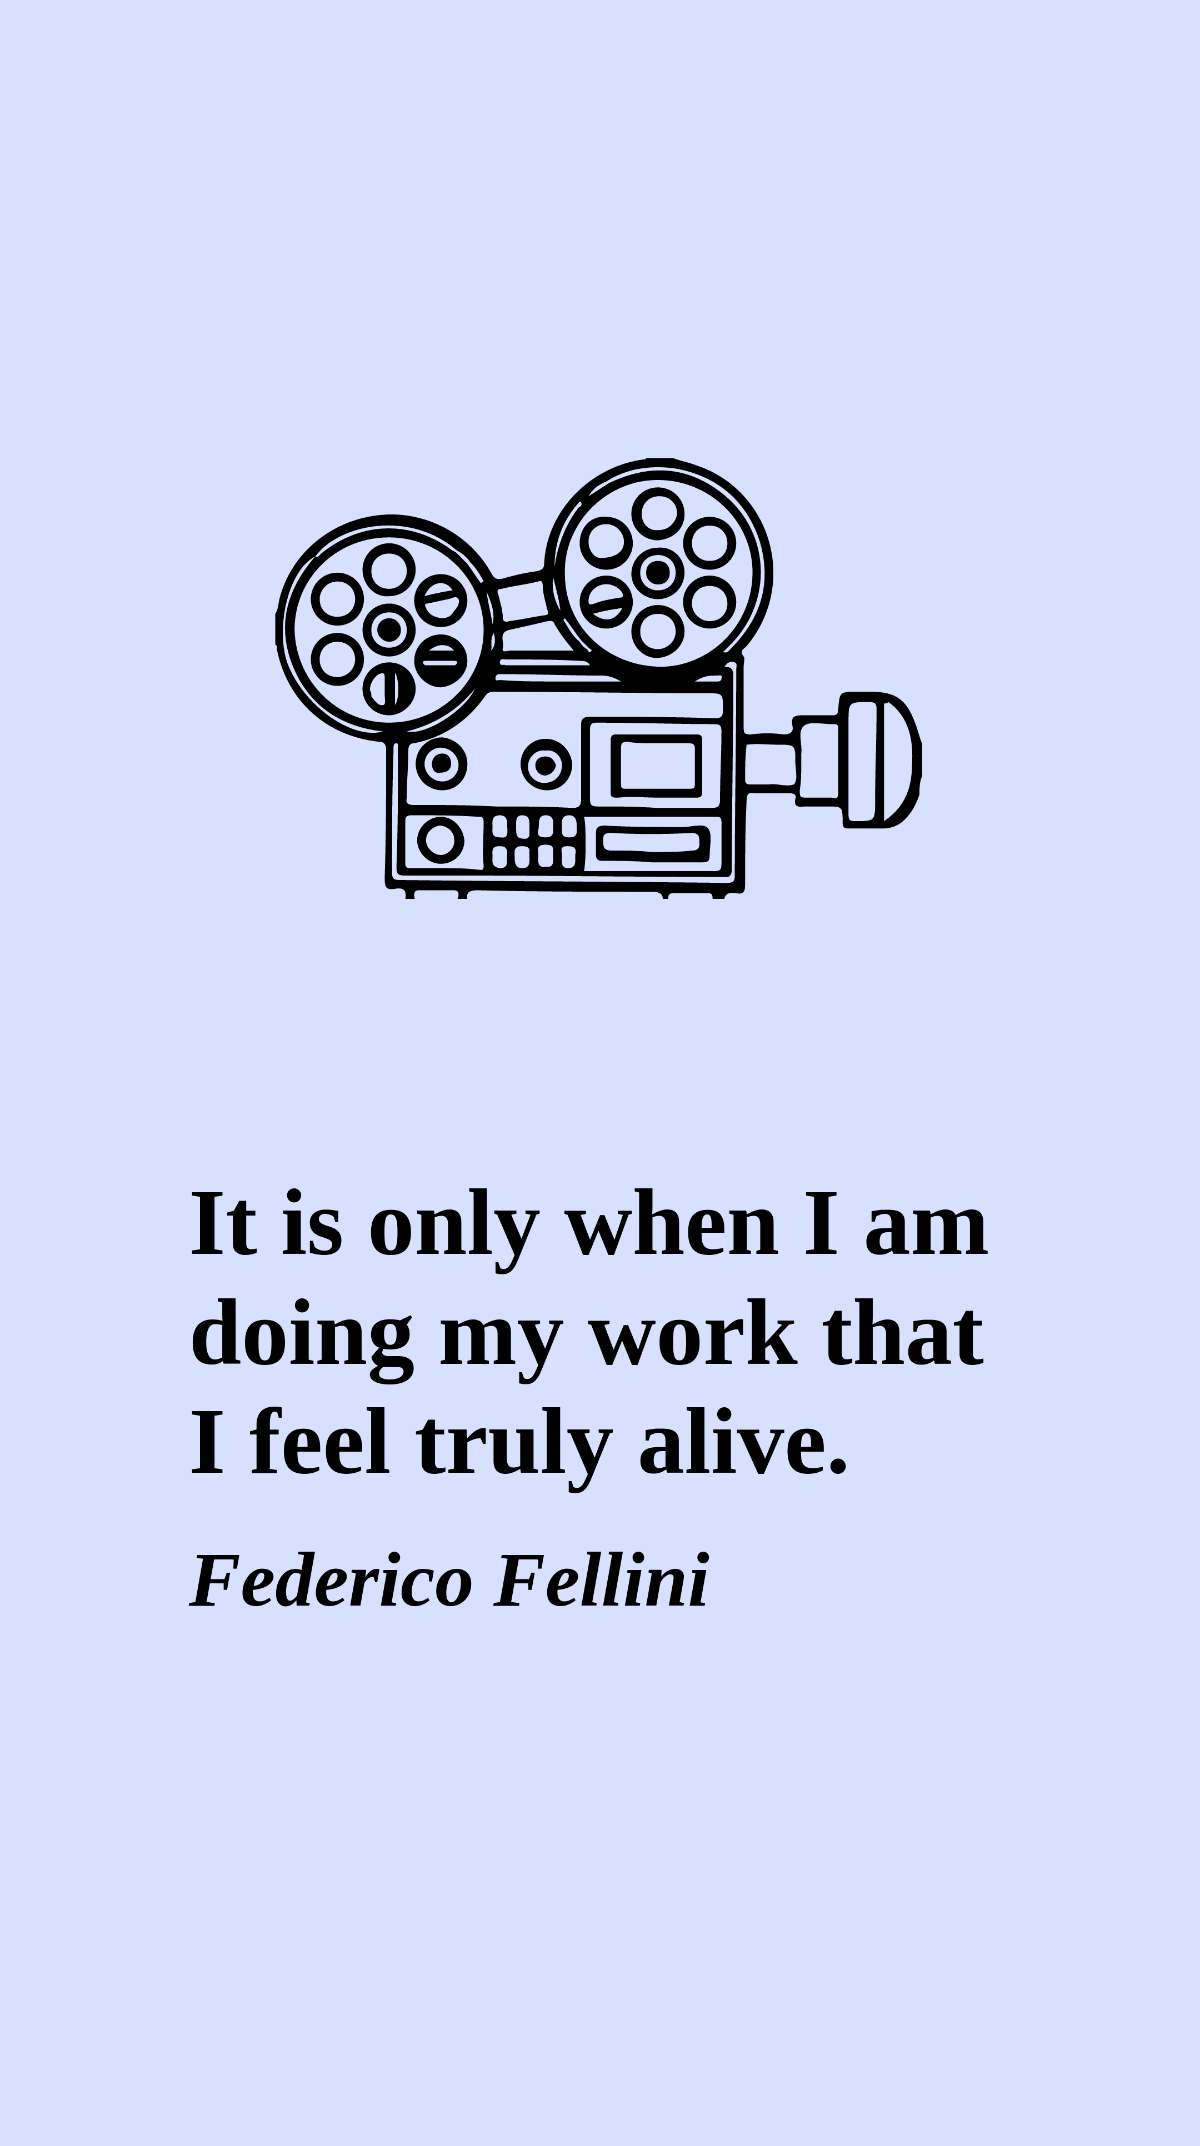 Free Federico Fellini - It is only when I am doing my work that I feel truly alive. Template